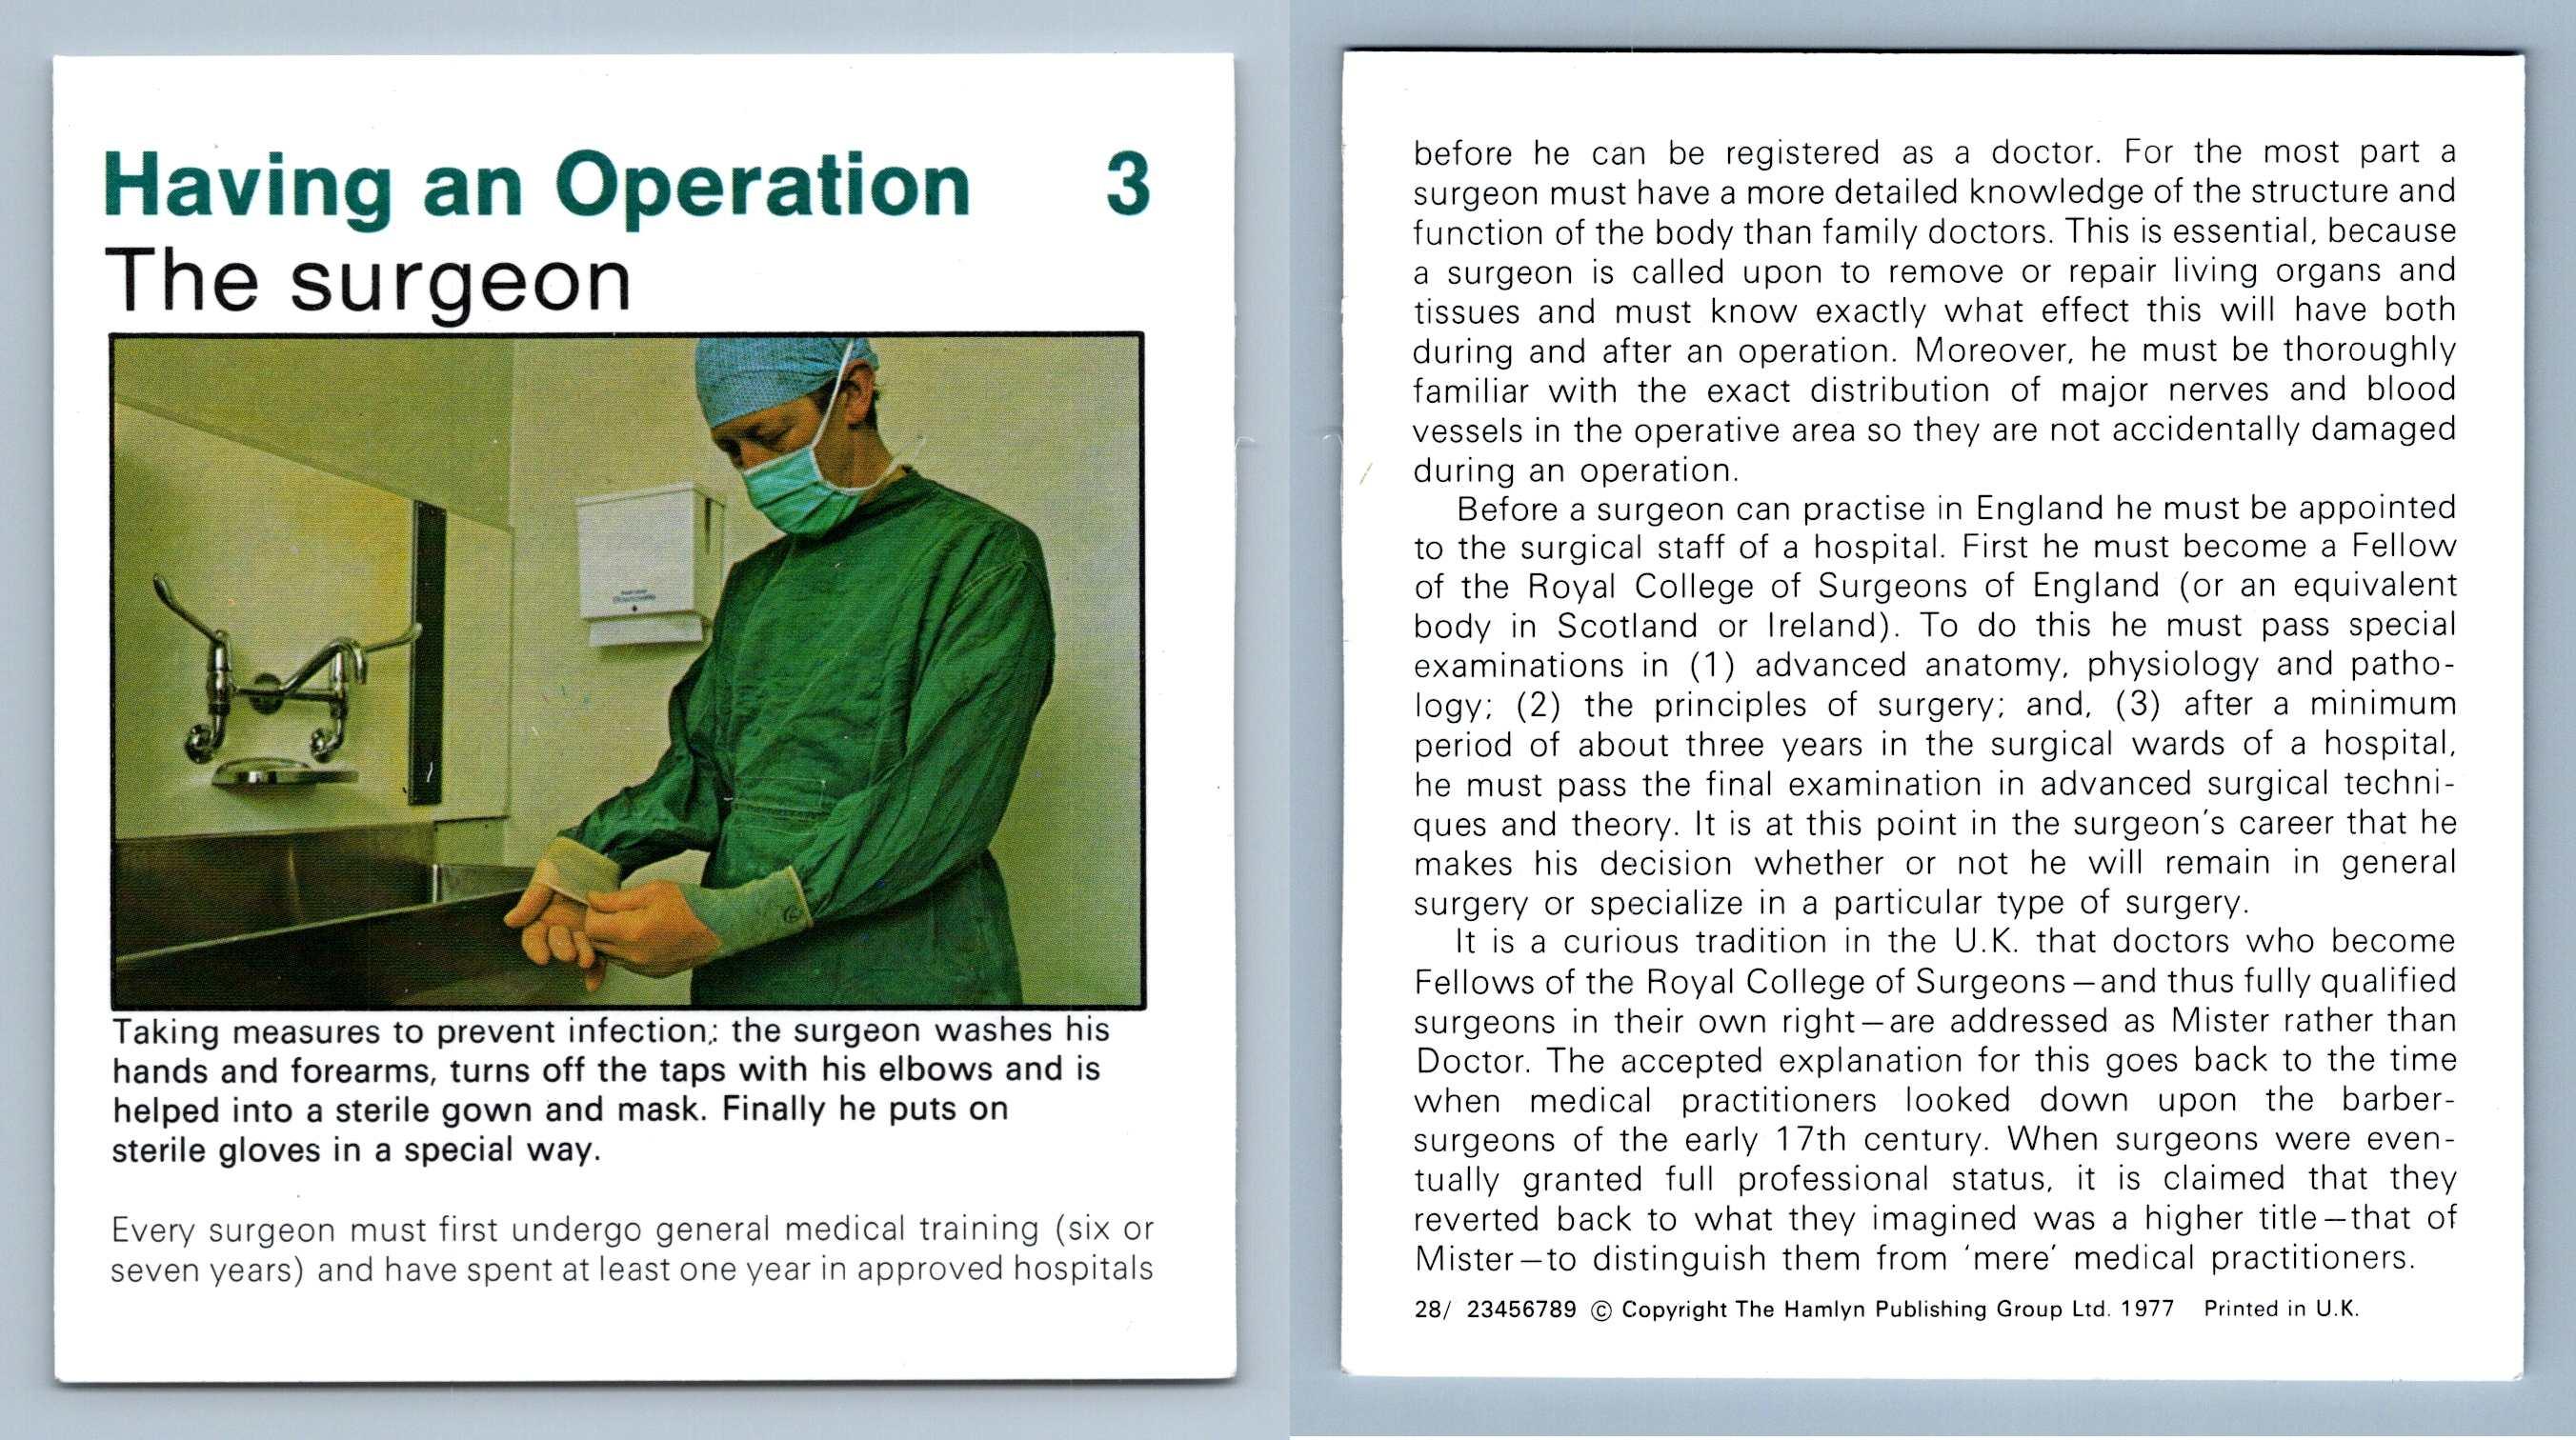 the-surgeon-3-operation-home-medical-guide-1975-8-hamlyn-card